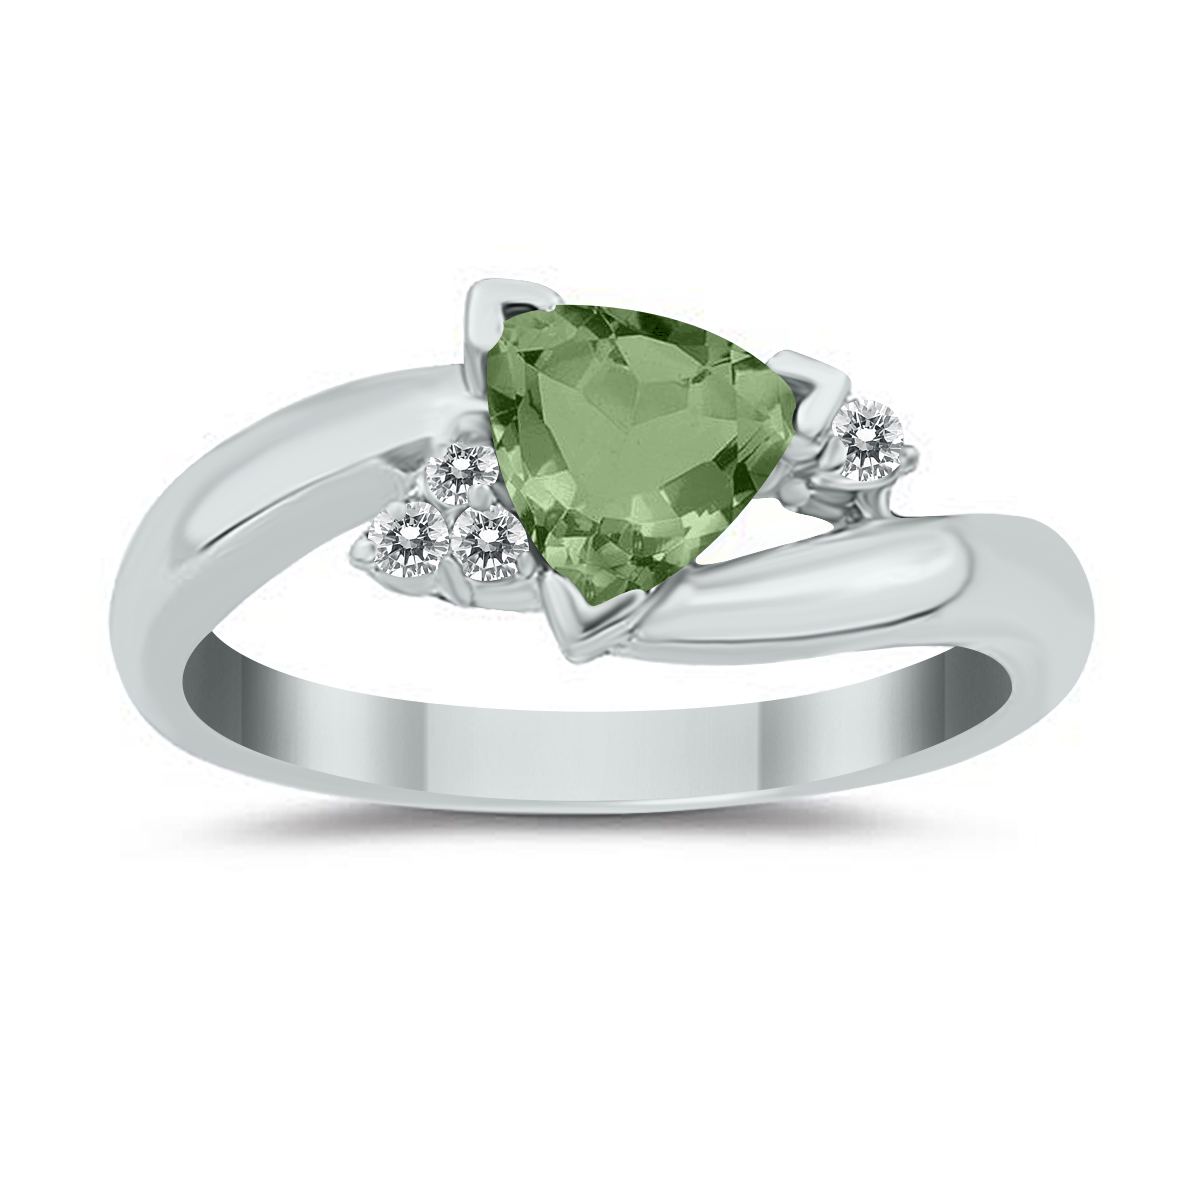 Trillion Cut Green Amethyst and Diamond Ring in 14K White Gold